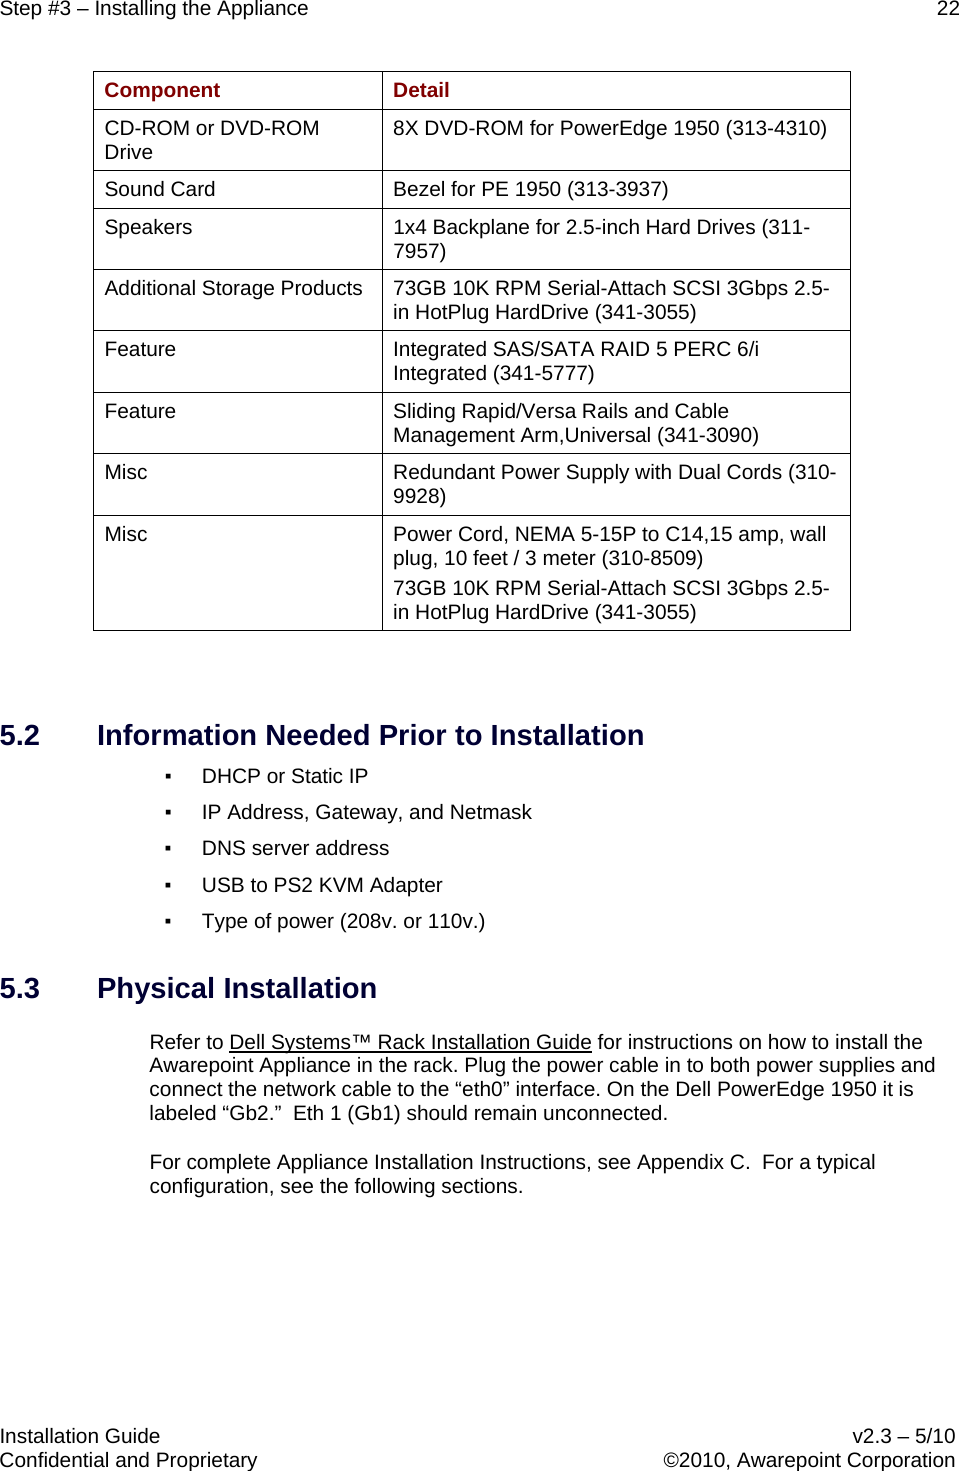 Step #3 – Installing the Appliance    22   Installation Guide    v2.3 – 5/10 Confidential and Proprietary    ©2010, Awarepoint Corporation  Component  Detail CD-ROM or DVD-ROM Drive 8X DVD-ROM for PowerEdge 1950 (313-4310) Sound Card Bezel for PE 1950 (313-3937) Speakers 1x4 Backplane for 2.5-inch Hard Drives (311-7957) Additional Storage Products 73GB 10K RPM Serial-Attach SCSI 3Gbps 2.5-in HotPlug HardDrive (341-3055) Feature Integrated SAS/SATA RAID 5 PERC 6/i Integrated (341-5777) Feature Sliding Rapid/Versa Rails and Cable Management Arm,Universal (341-3090) Misc Redundant Power Supply with Dual Cords (310-9928) Misc Power Cord, NEMA 5-15P to C14,15 amp, wall plug, 10 feet / 3 meter (310-8509) 73GB 10K RPM Serial-Attach SCSI 3Gbps 2.5-in HotPlug HardDrive (341-3055)  5.2 Information Needed Prior to Installation ▪ DHCP or Static IP ▪ IP Address, Gateway, and Netmask ▪ DNS server address ▪ USB to PS2 KVM Adapter ▪ Type of power (208v. or 110v.) 5.3 Physical Installation Refer to Dell Systems™ Rack Installation Guide for instructions on how to install the Awarepoint Appliance in the rack. Plug the power cable in to both power supplies and connect the network cable to the “eth0” interface. On the Dell PowerEdge 1950 it is labeled “Gb2.”  Eth 1 (Gb1) should remain unconnected. For complete Appliance Installation Instructions, see Appendix C.  For a typical configuration, see the following sections.   